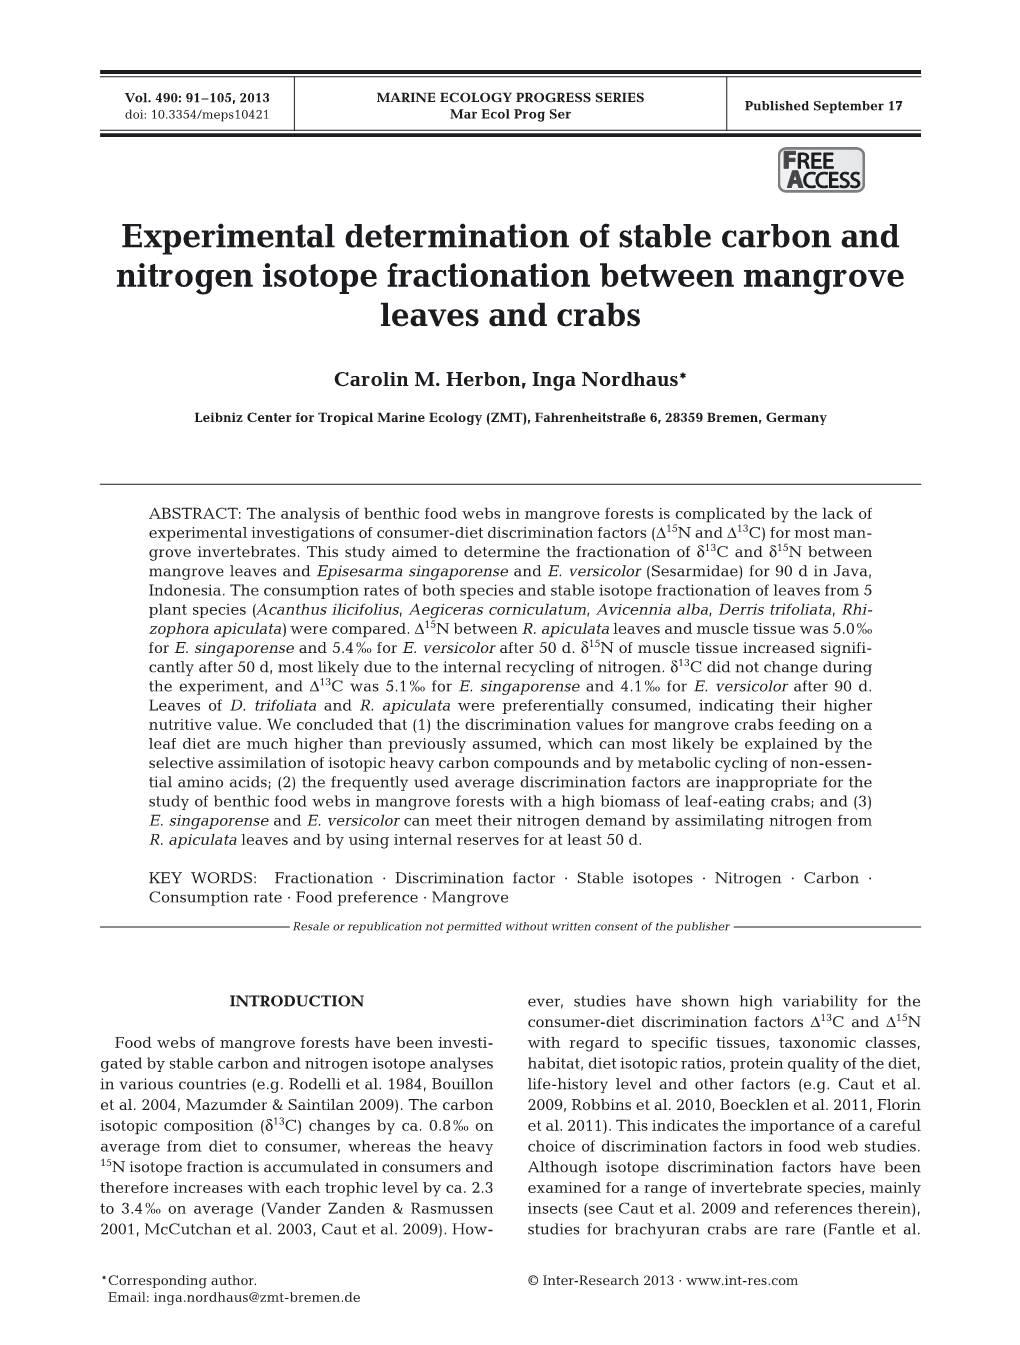 Experimental Determination of Stable Carbon and Nitrogen Isotope Fractionation Between Mangrove Leaves and Crabs